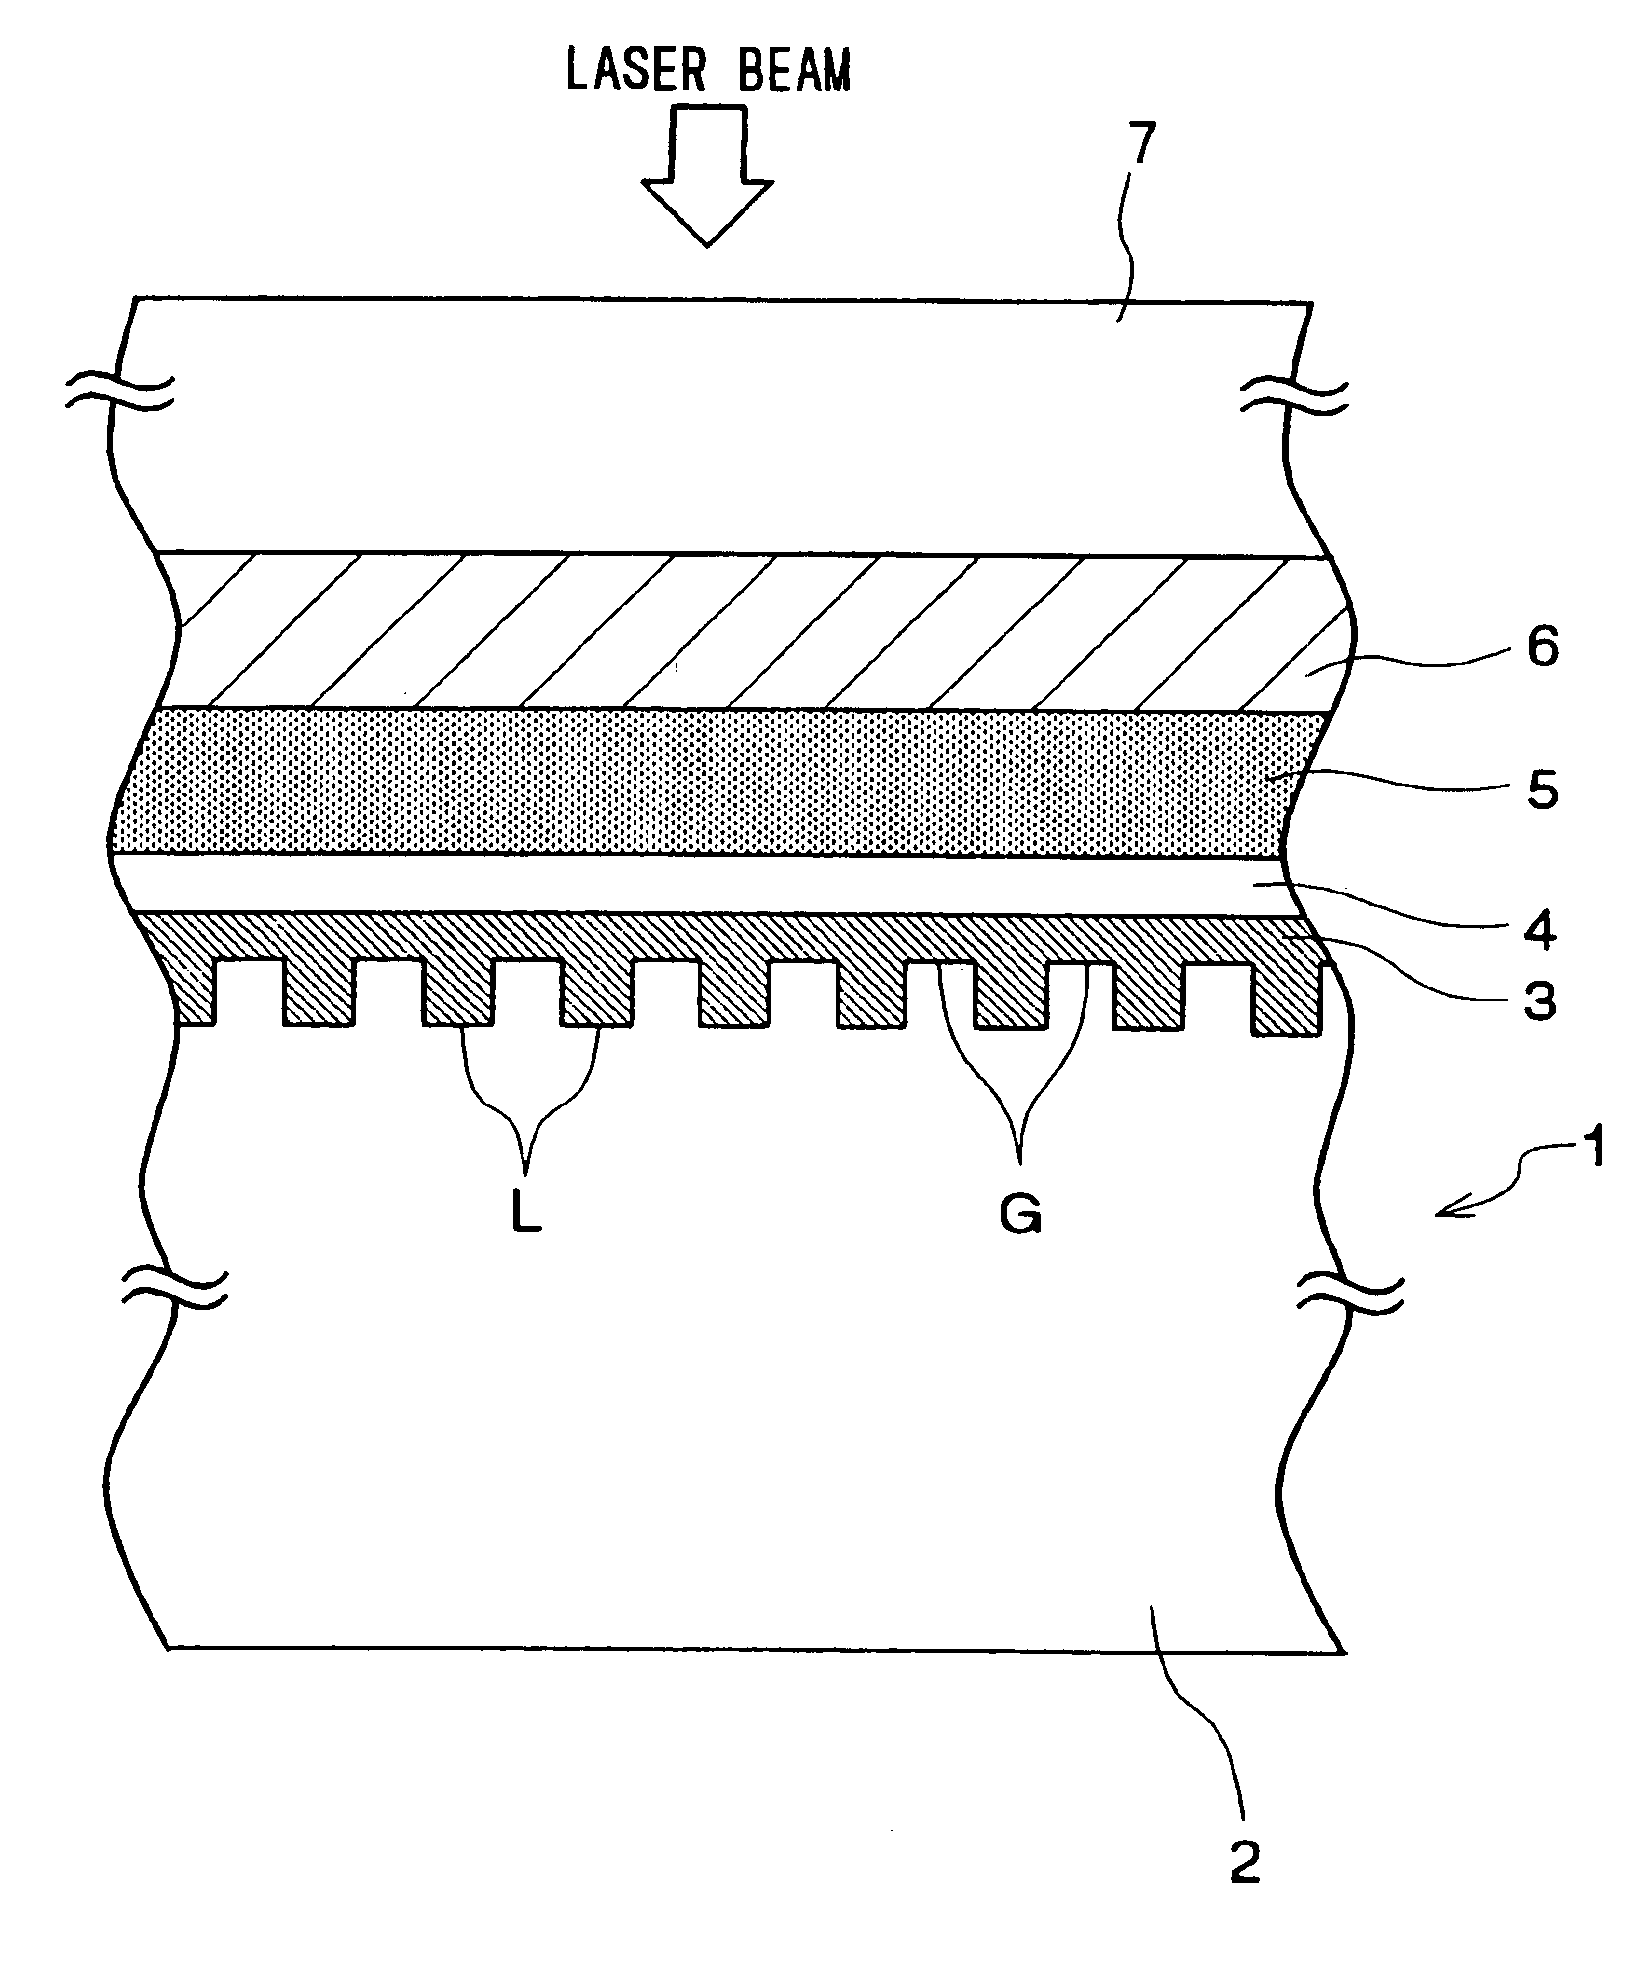 Optical recording disk, method for making and using the same